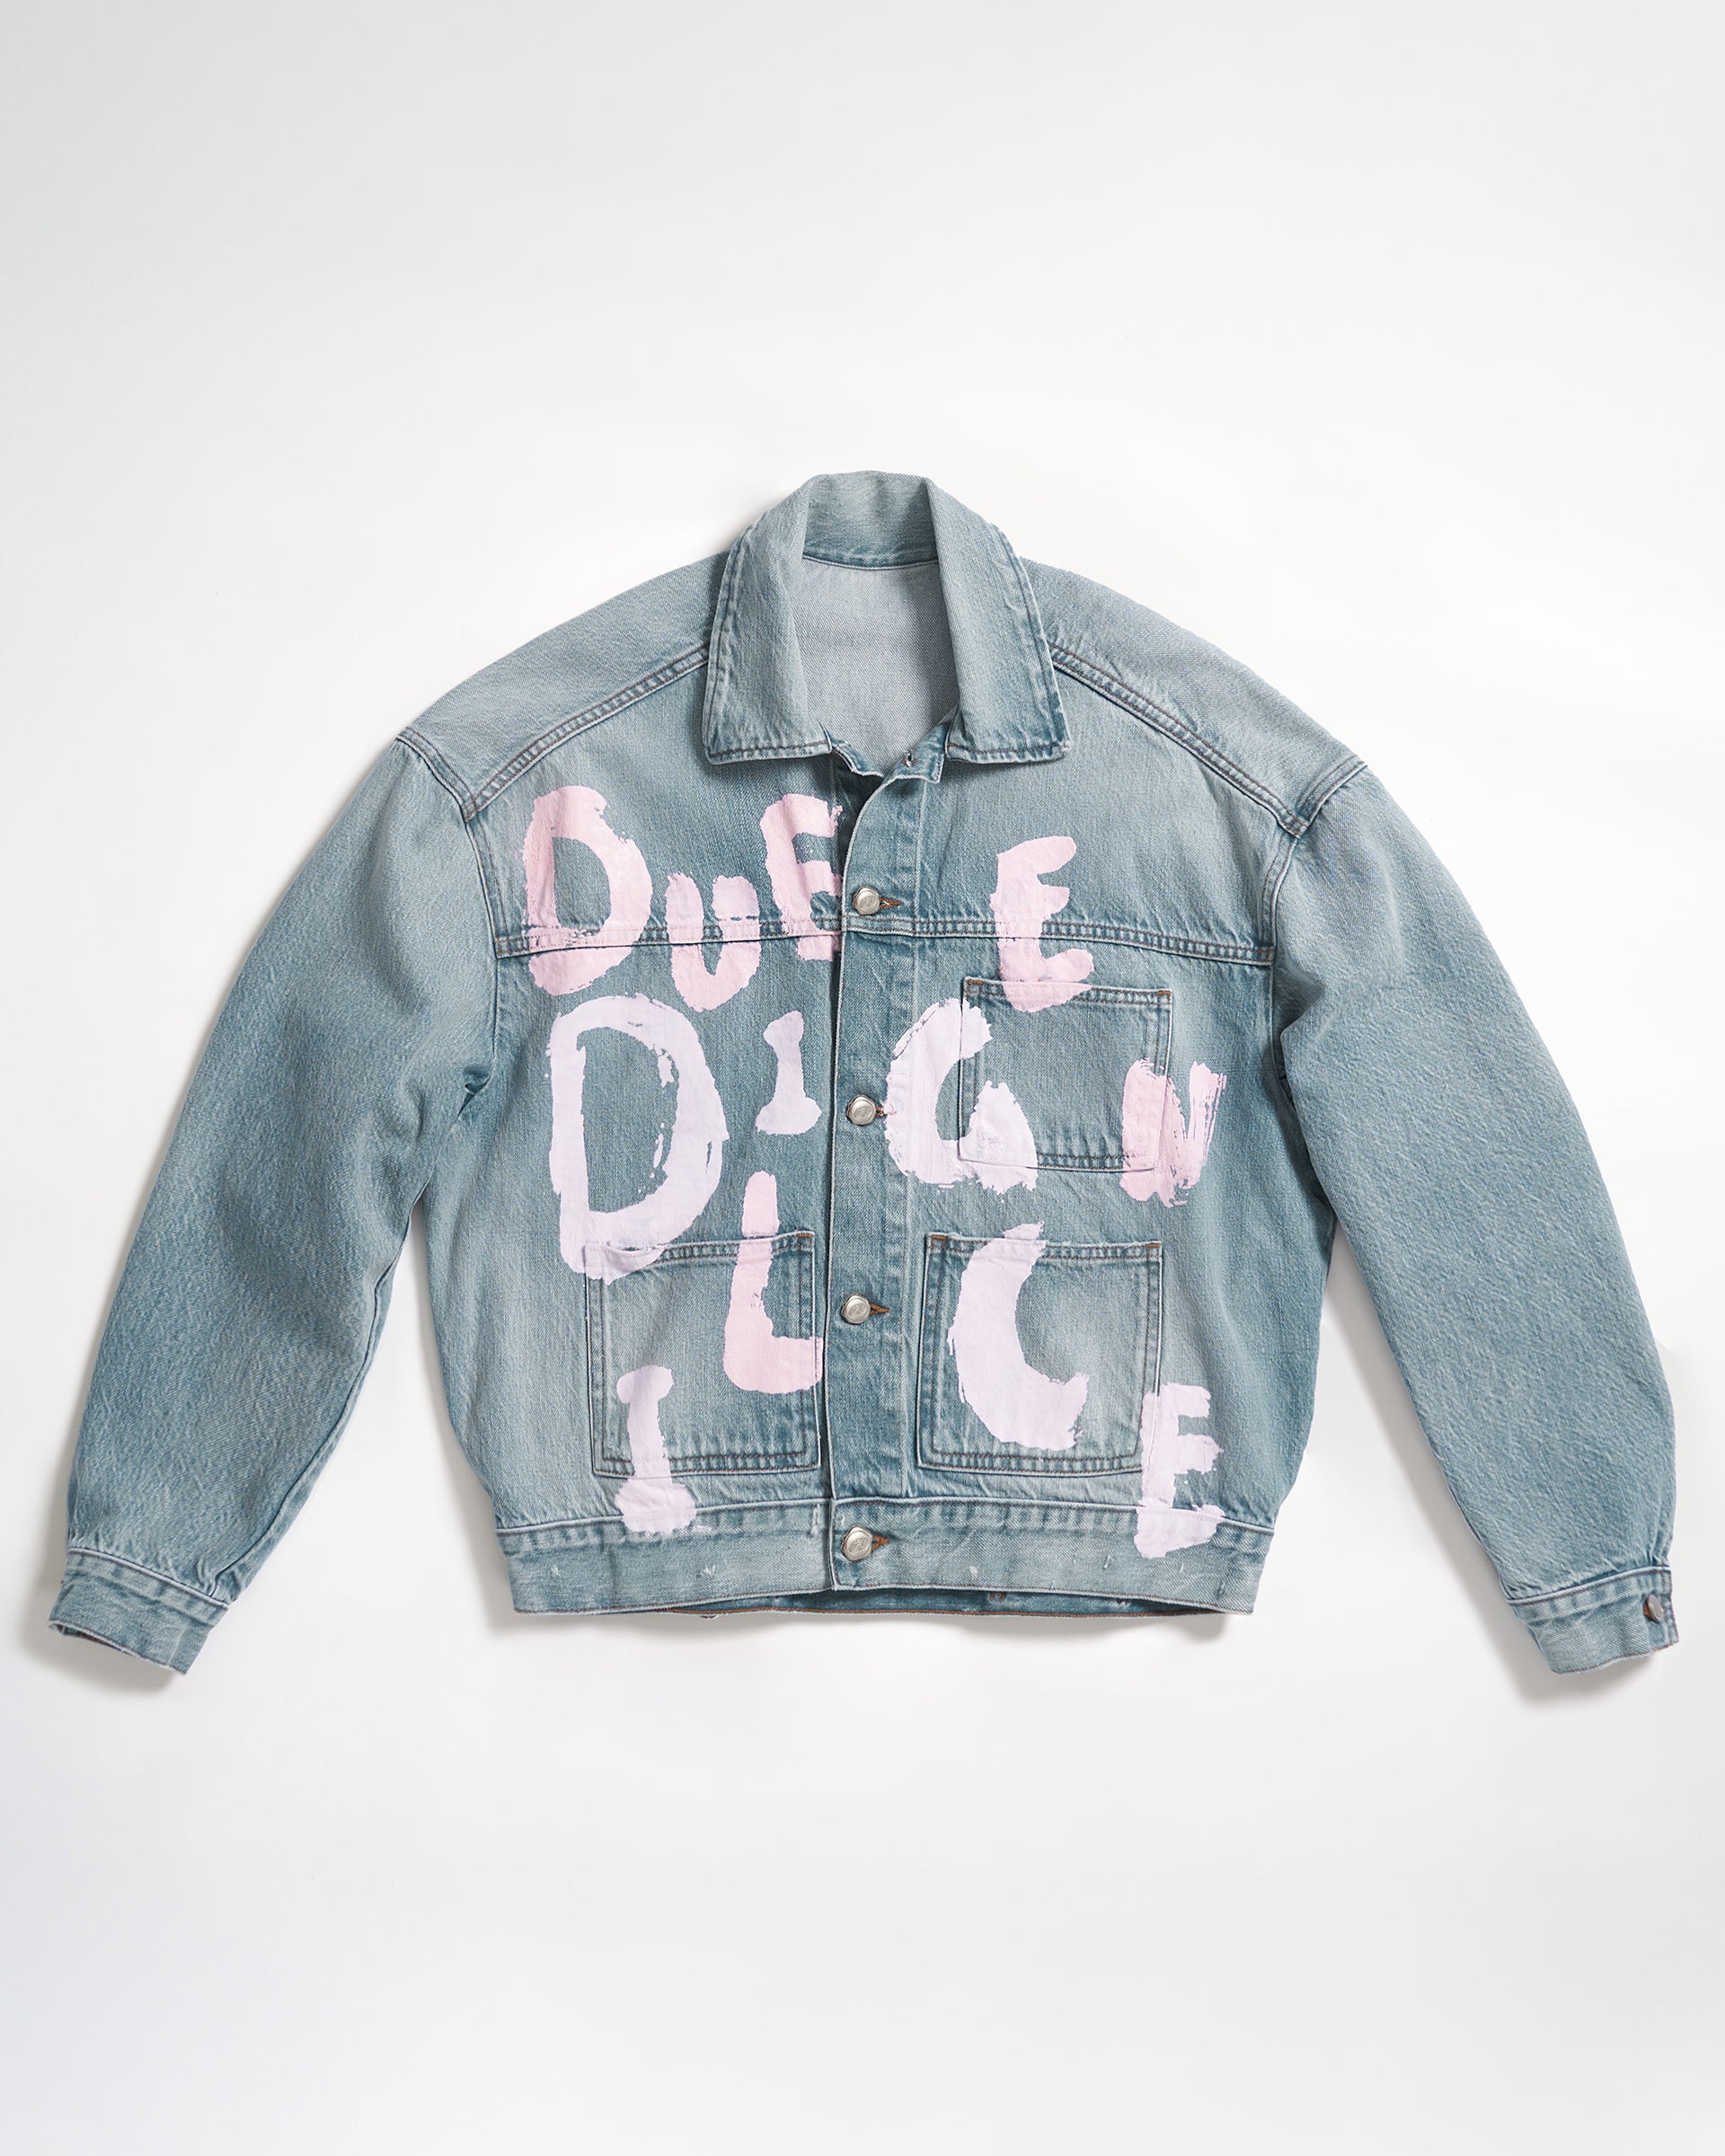 Chemical wash Denim Jackets from AW22 collection